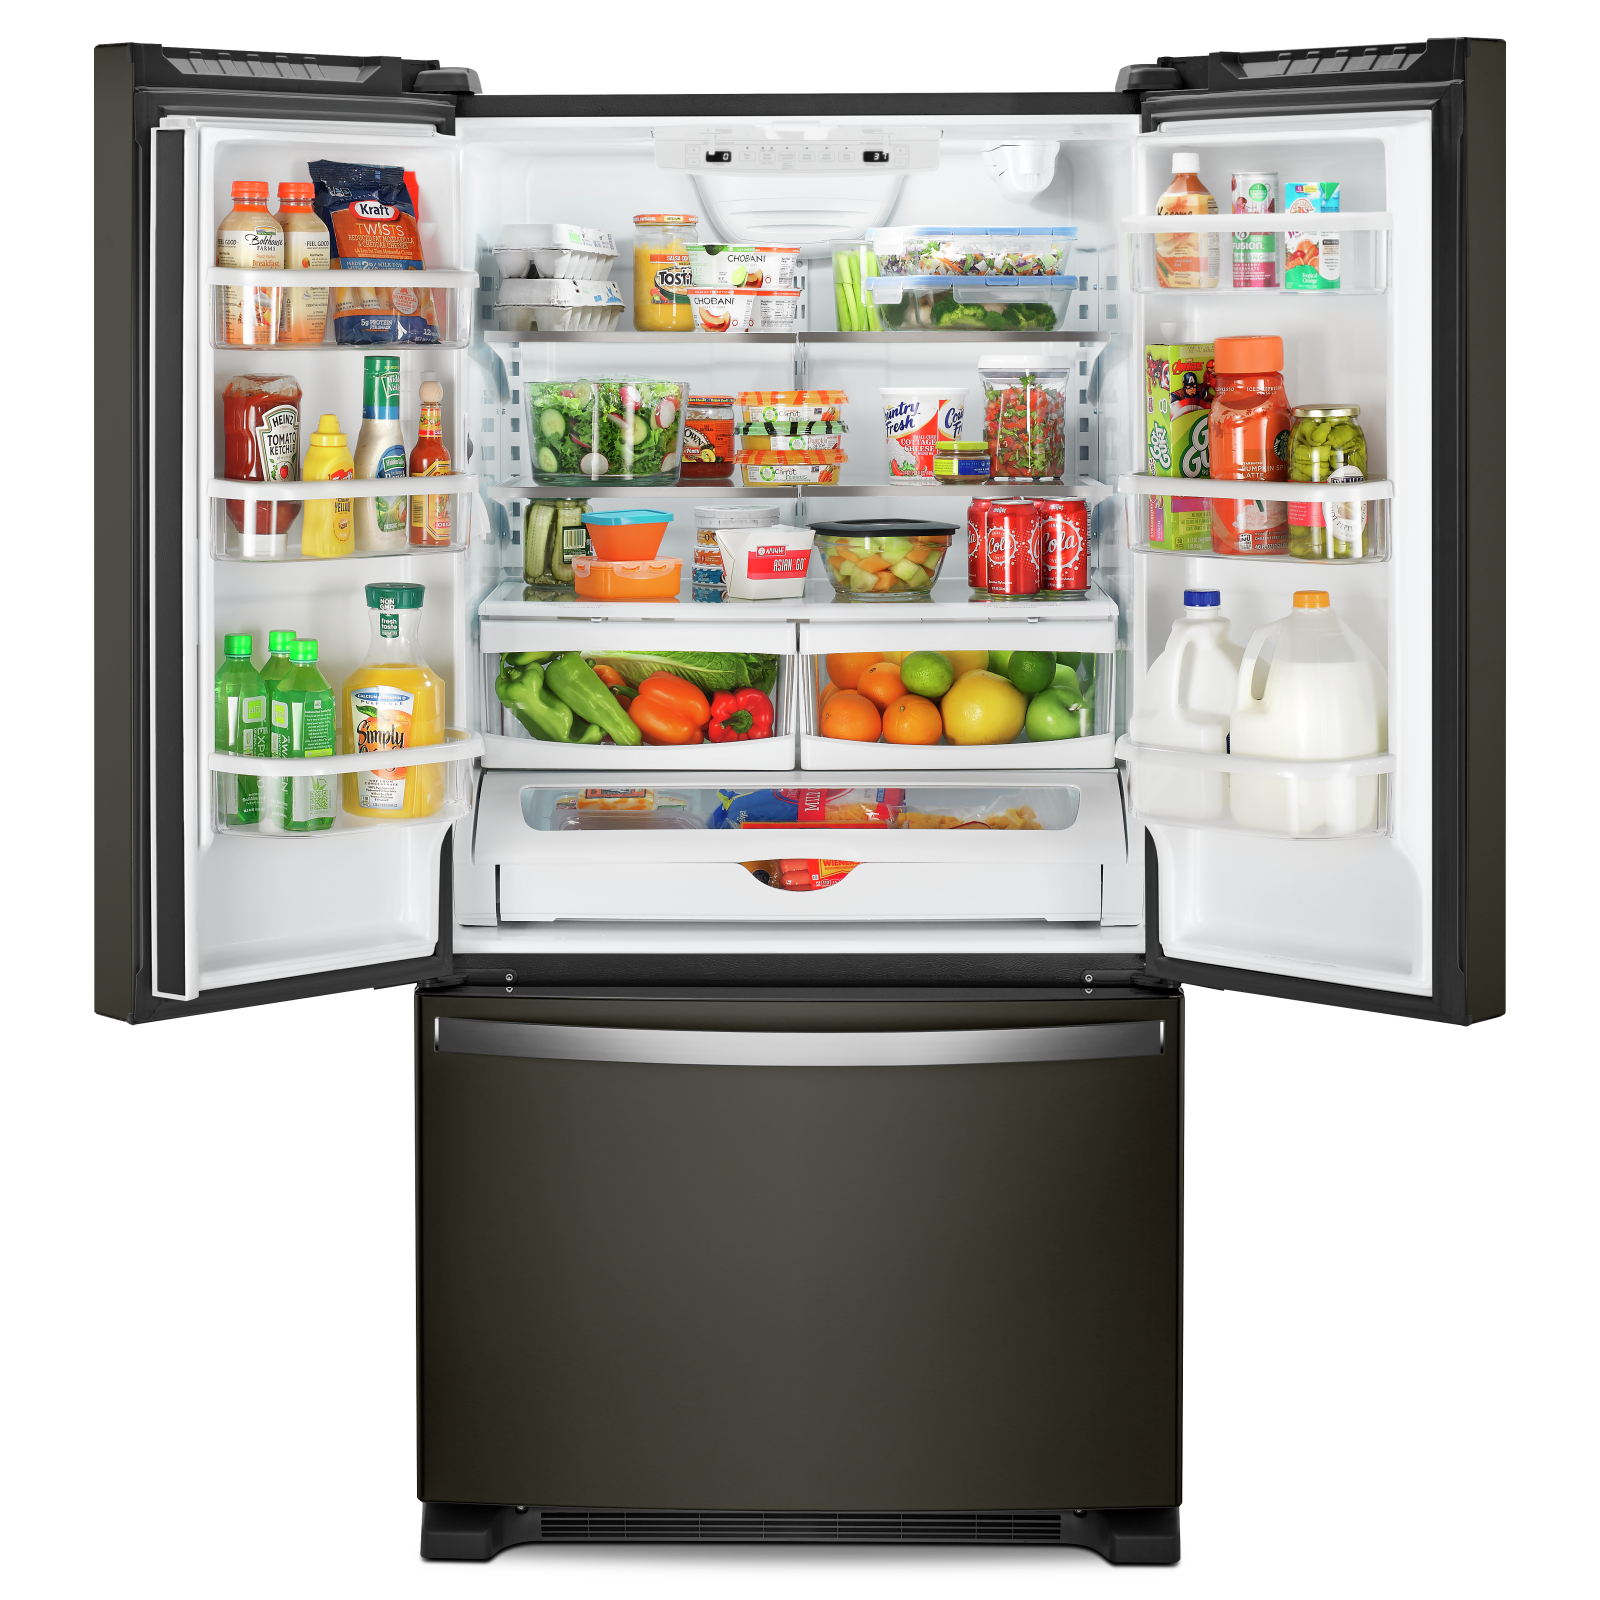 Whirlpool - 32.625 Inch 22.1 cu. ft French Door Refrigerator in Black Stainless - WRFF5333PV